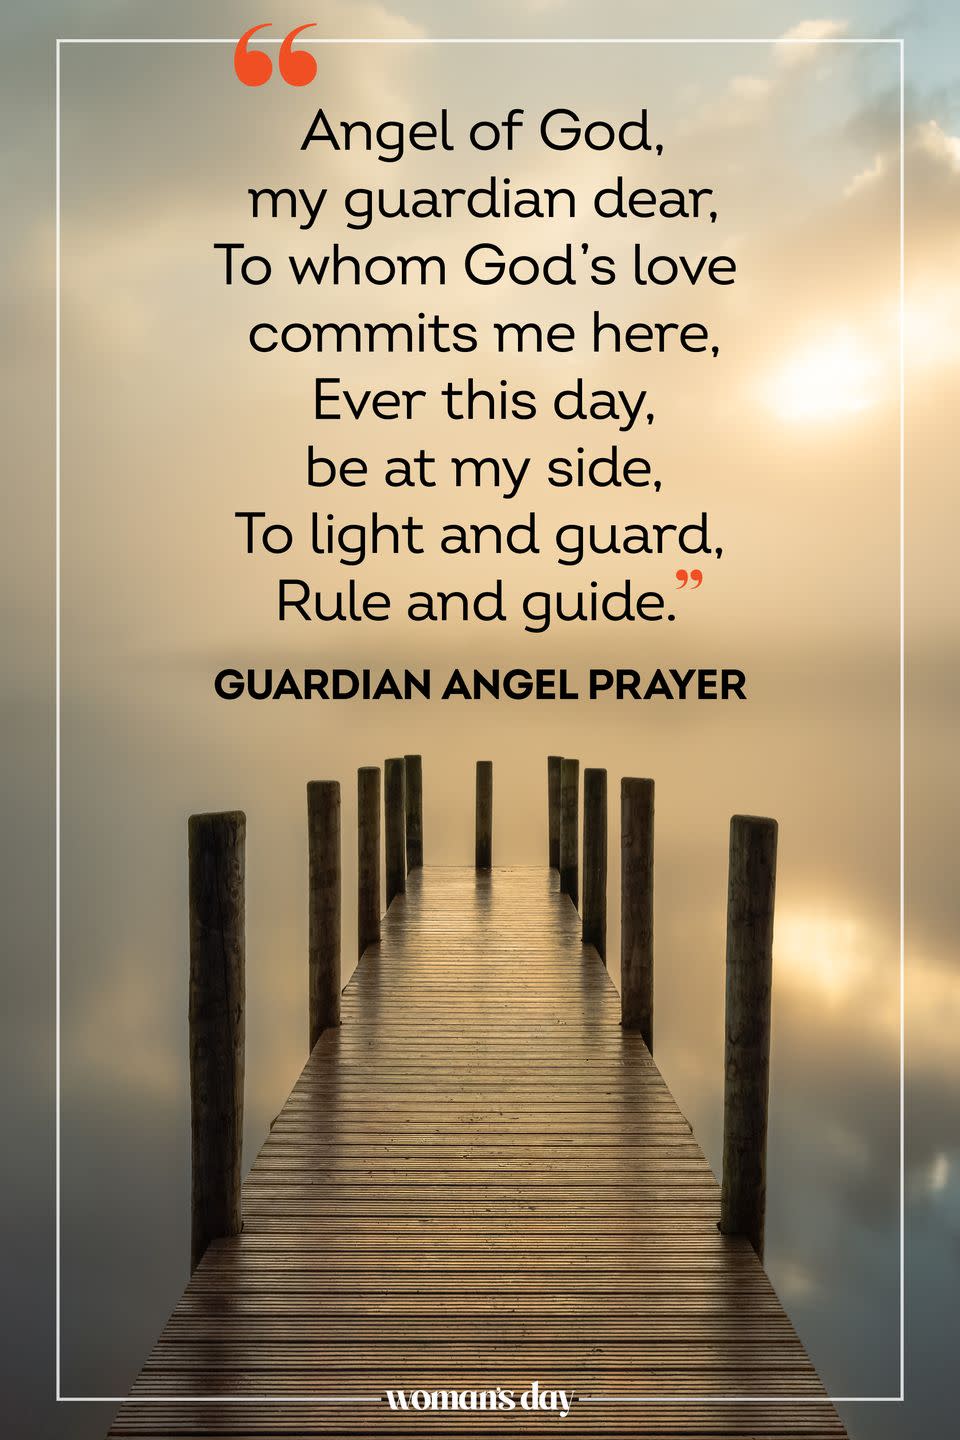 <p>Angel of God, my guardian dear, to whom God's love commits me here, ever this day, be at my side, to light and guard, rule and guide.</p><p>— The Guardian Angel Prayer</p>